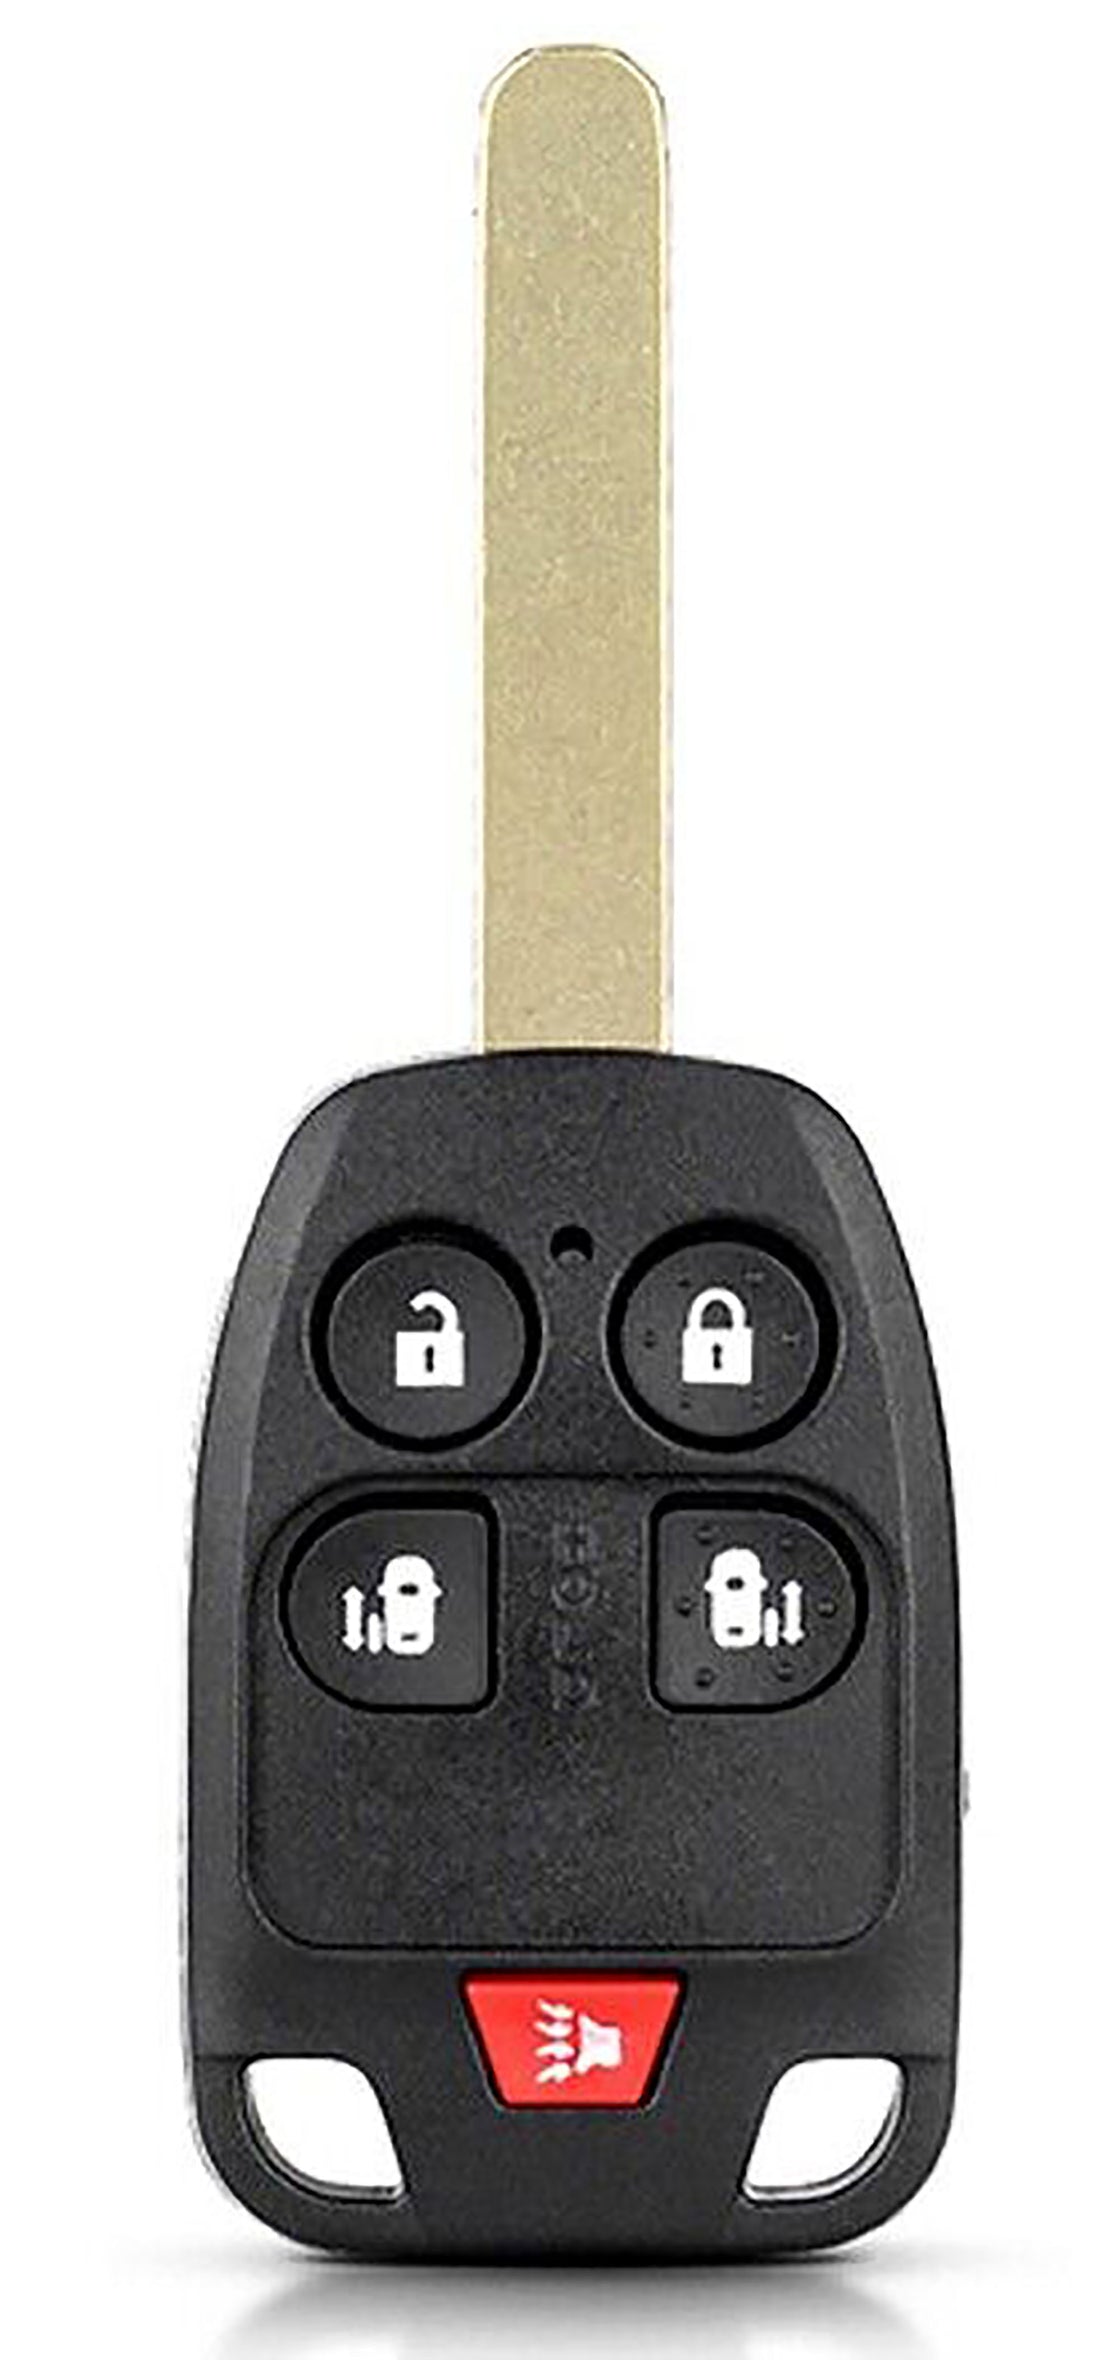 1x New Replacement Key Fob Compatible with & Fit For 2011 2012 2013 Honda Odyssey 315 MHz - MPN N5F-A04TAA-06